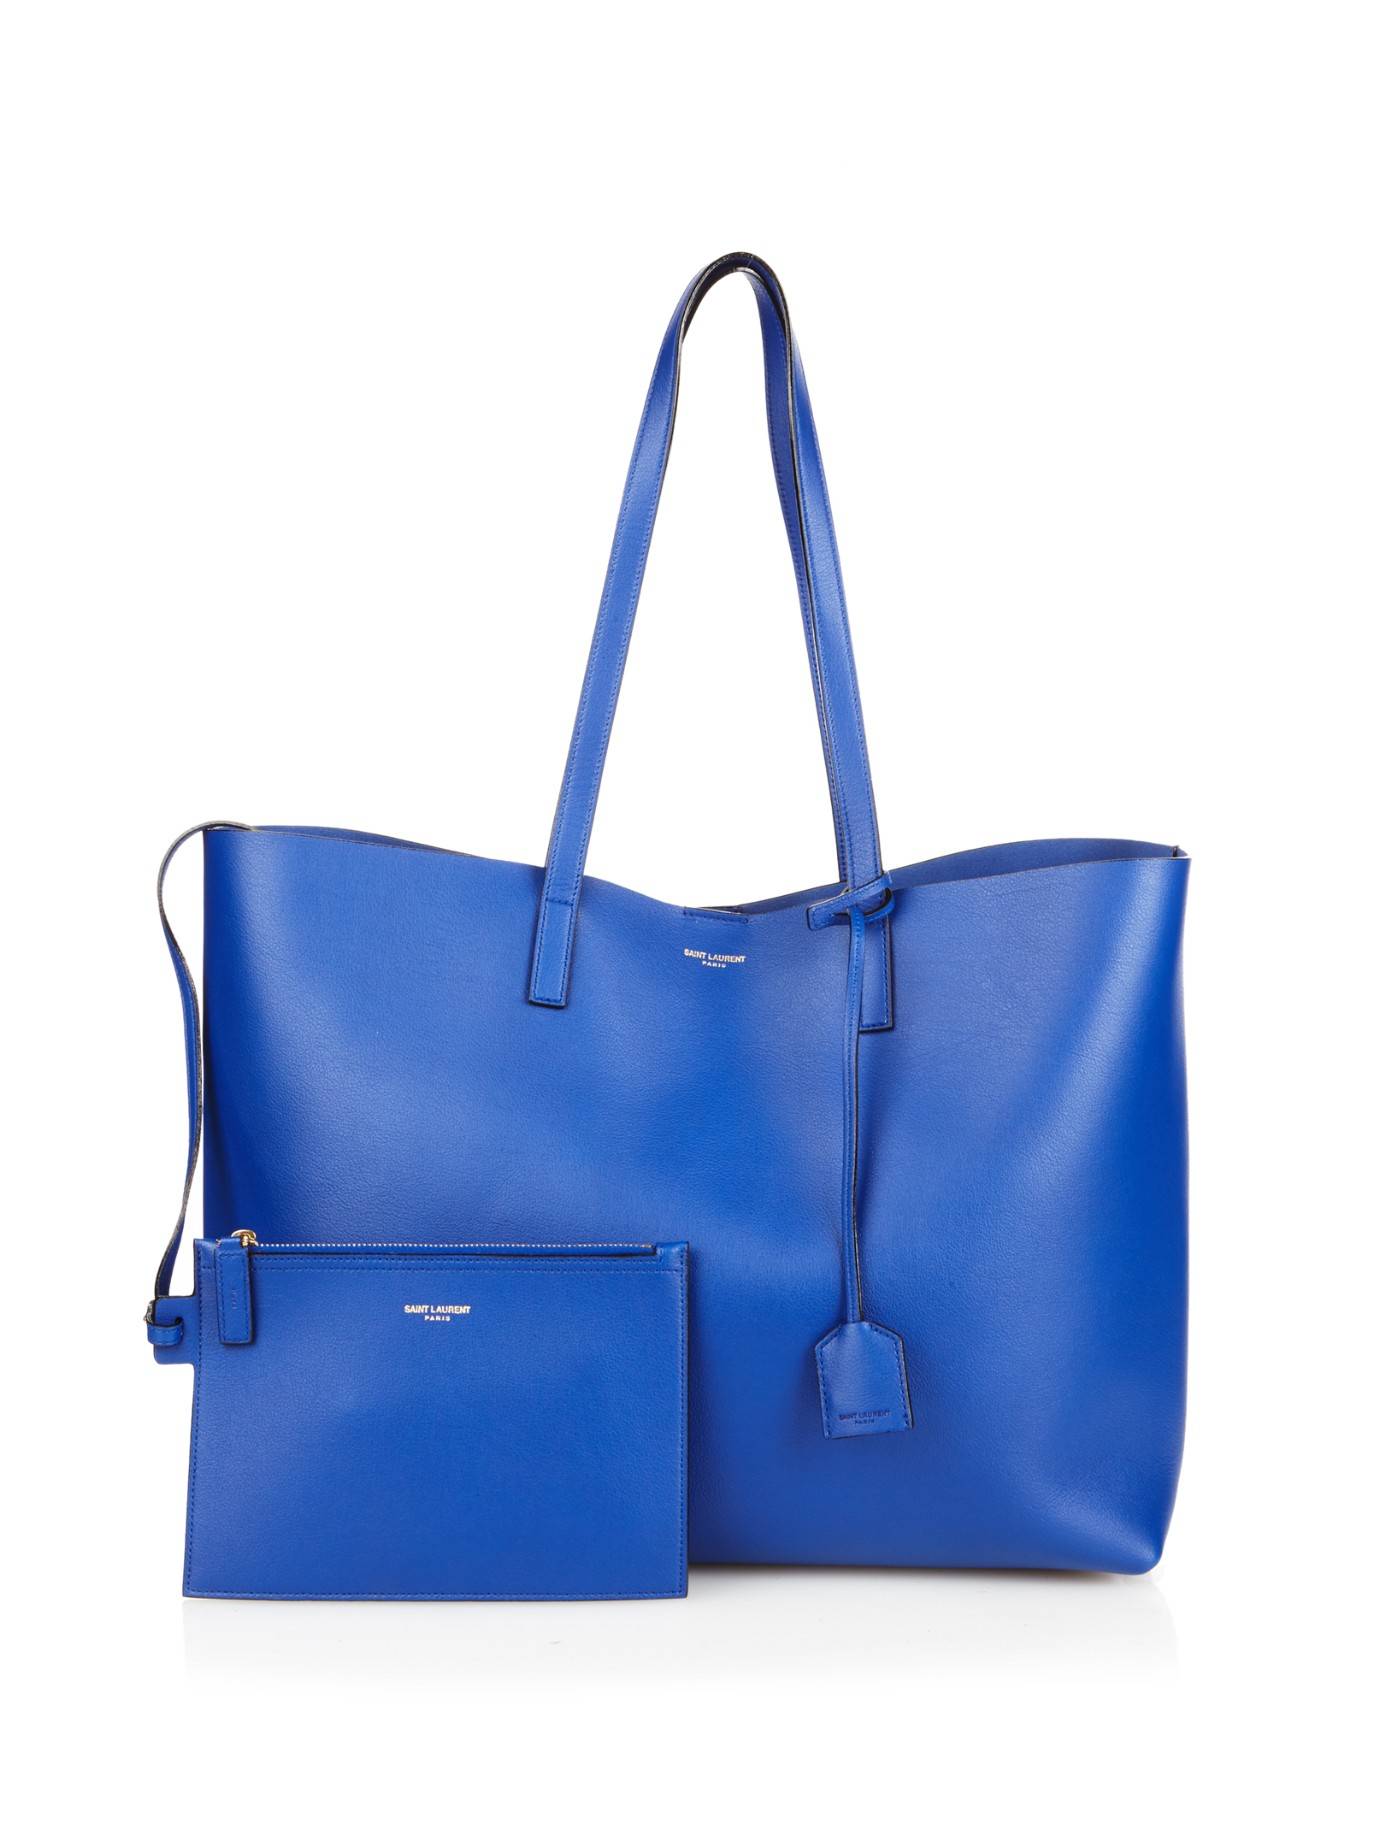 Saint Laurent Large Leather Shopping Bag in Blue | Lyst